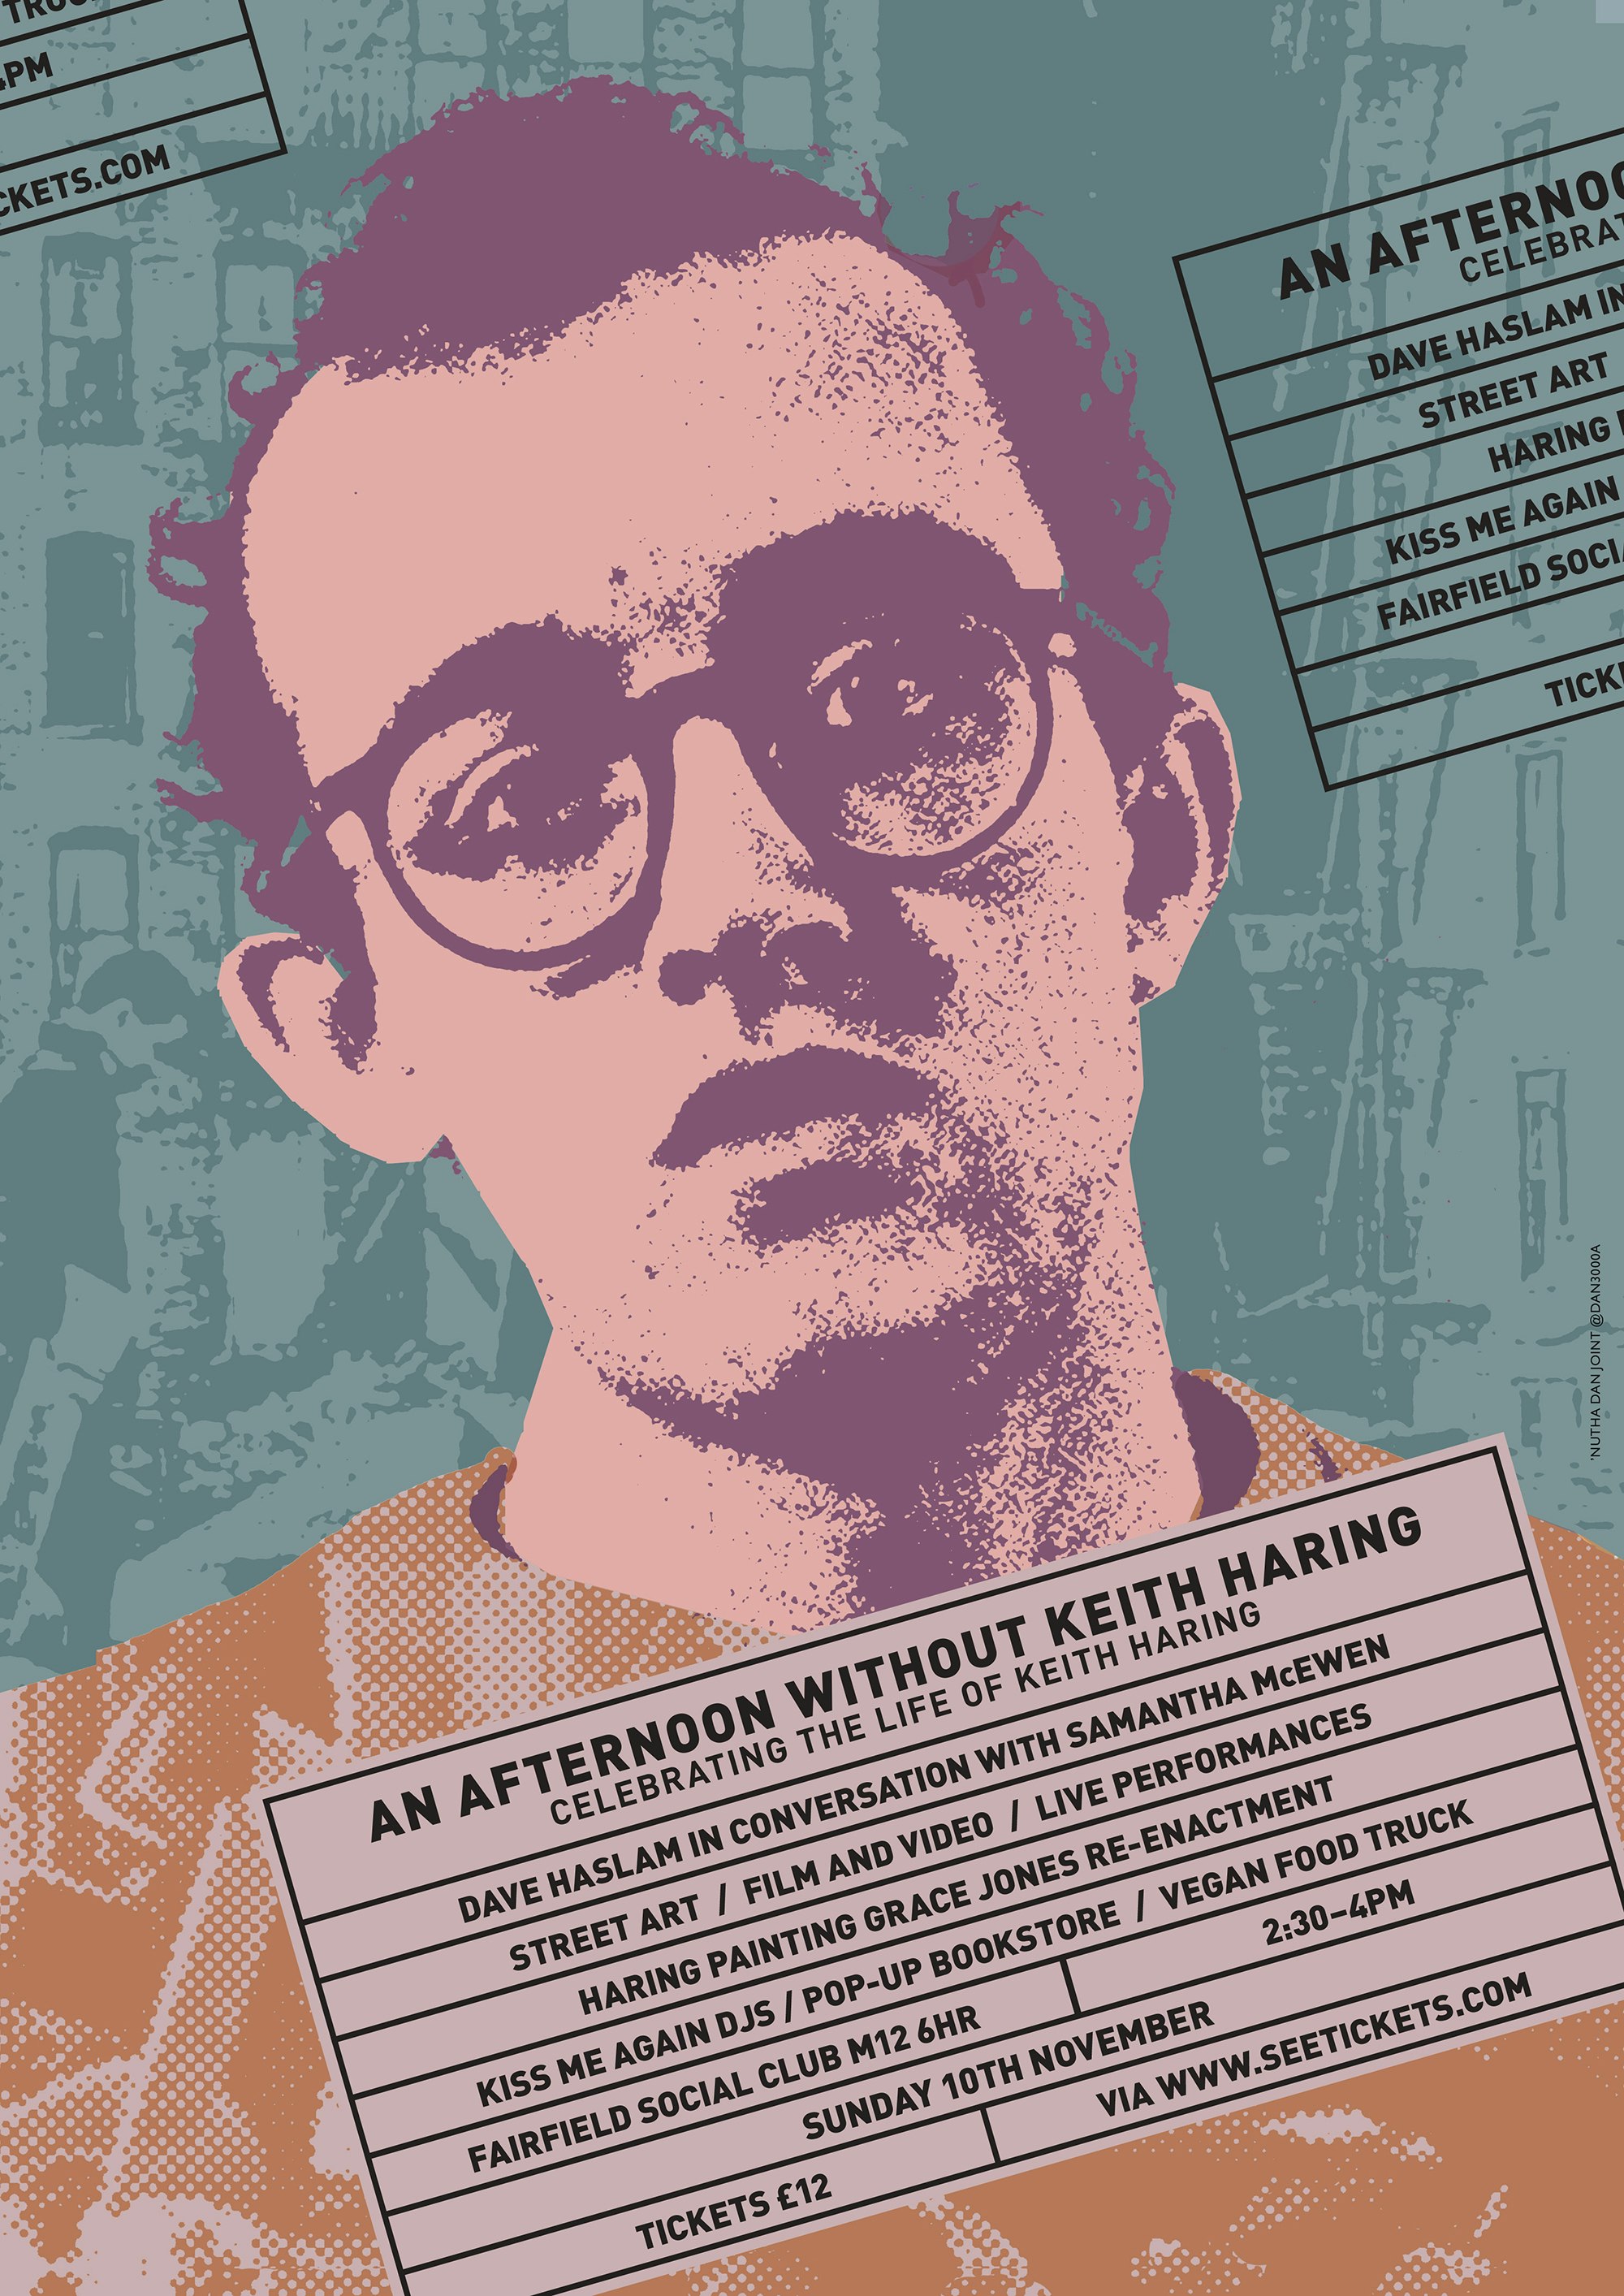 Dan Taylor - An Afternoon without Keith Haring — Dave Haslam book event